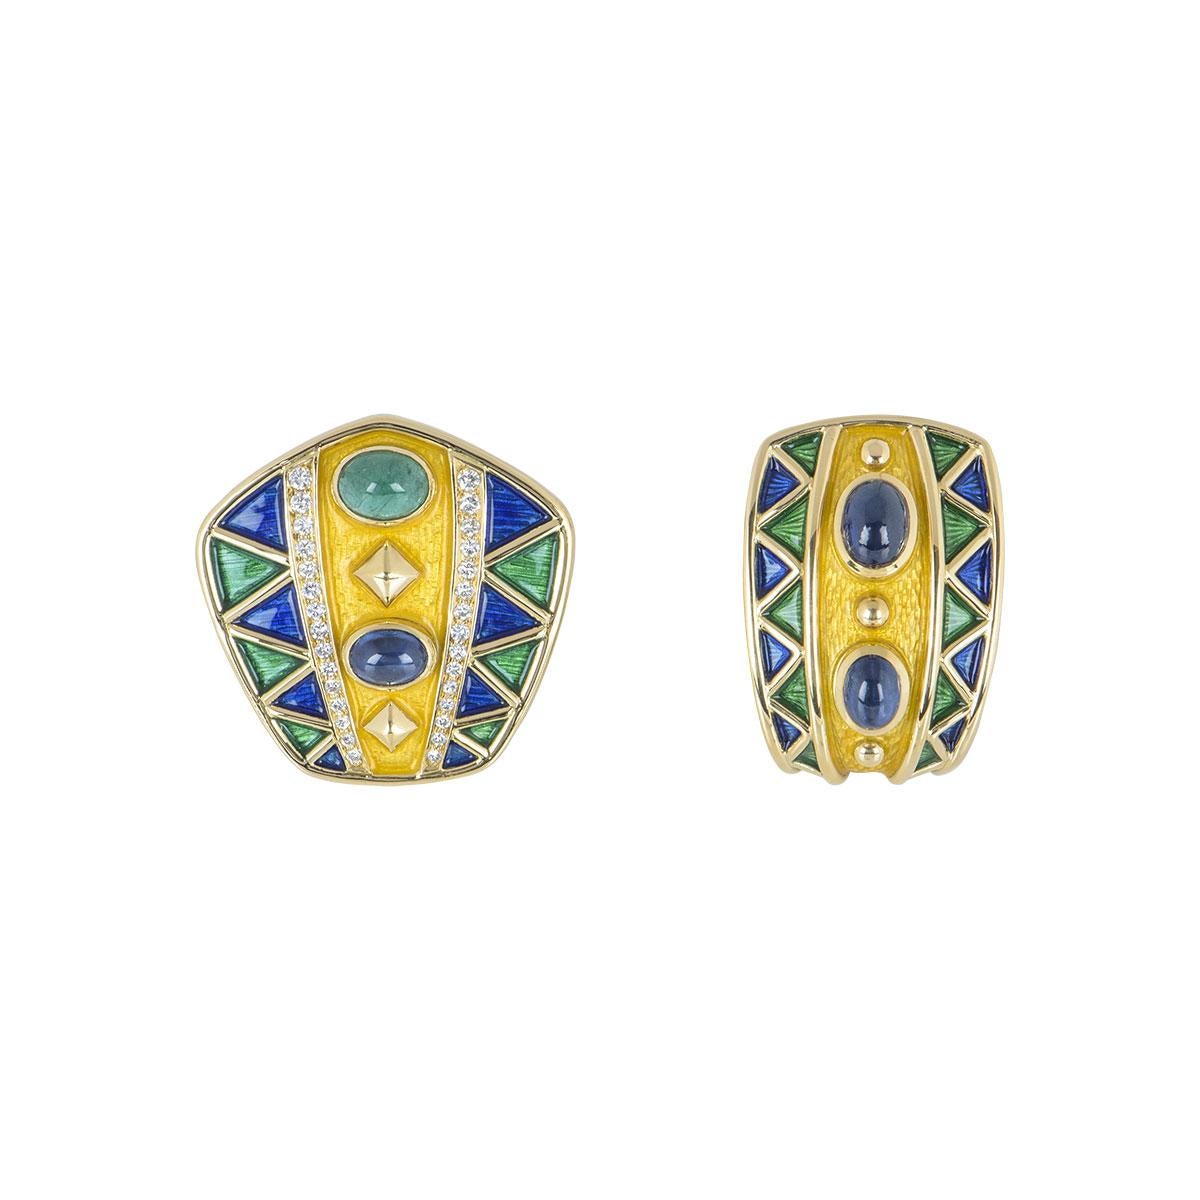 An 18k yellow gold diamond and multi-gem suite. The suite is composed of earrings and ring, pave set with round brilliant cut diamonds, cabochon shaped emeralds and sapphires evenly spaced with shaped blue, yellow and green lacquer. The earrings are